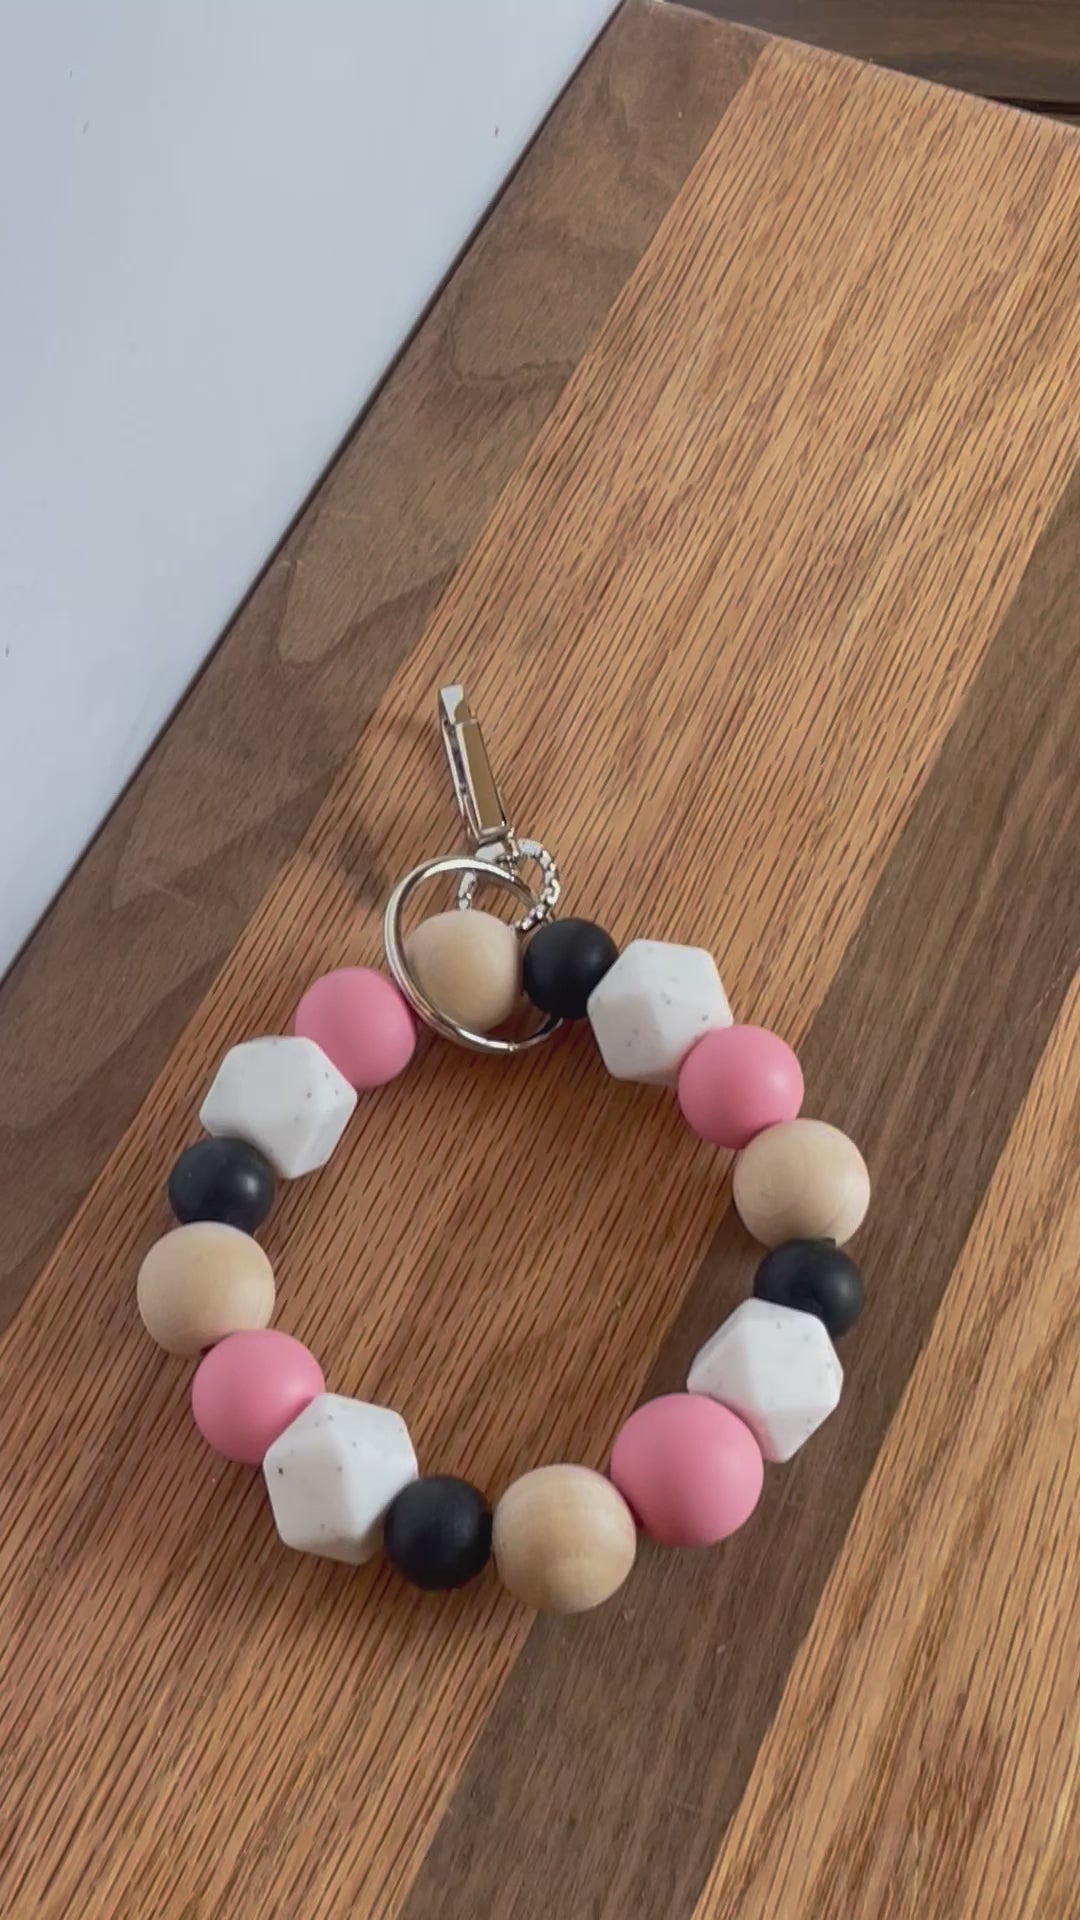 Short video of Pink, white, black silicone beads, wood round beads wristlet keychain laying on flat surface